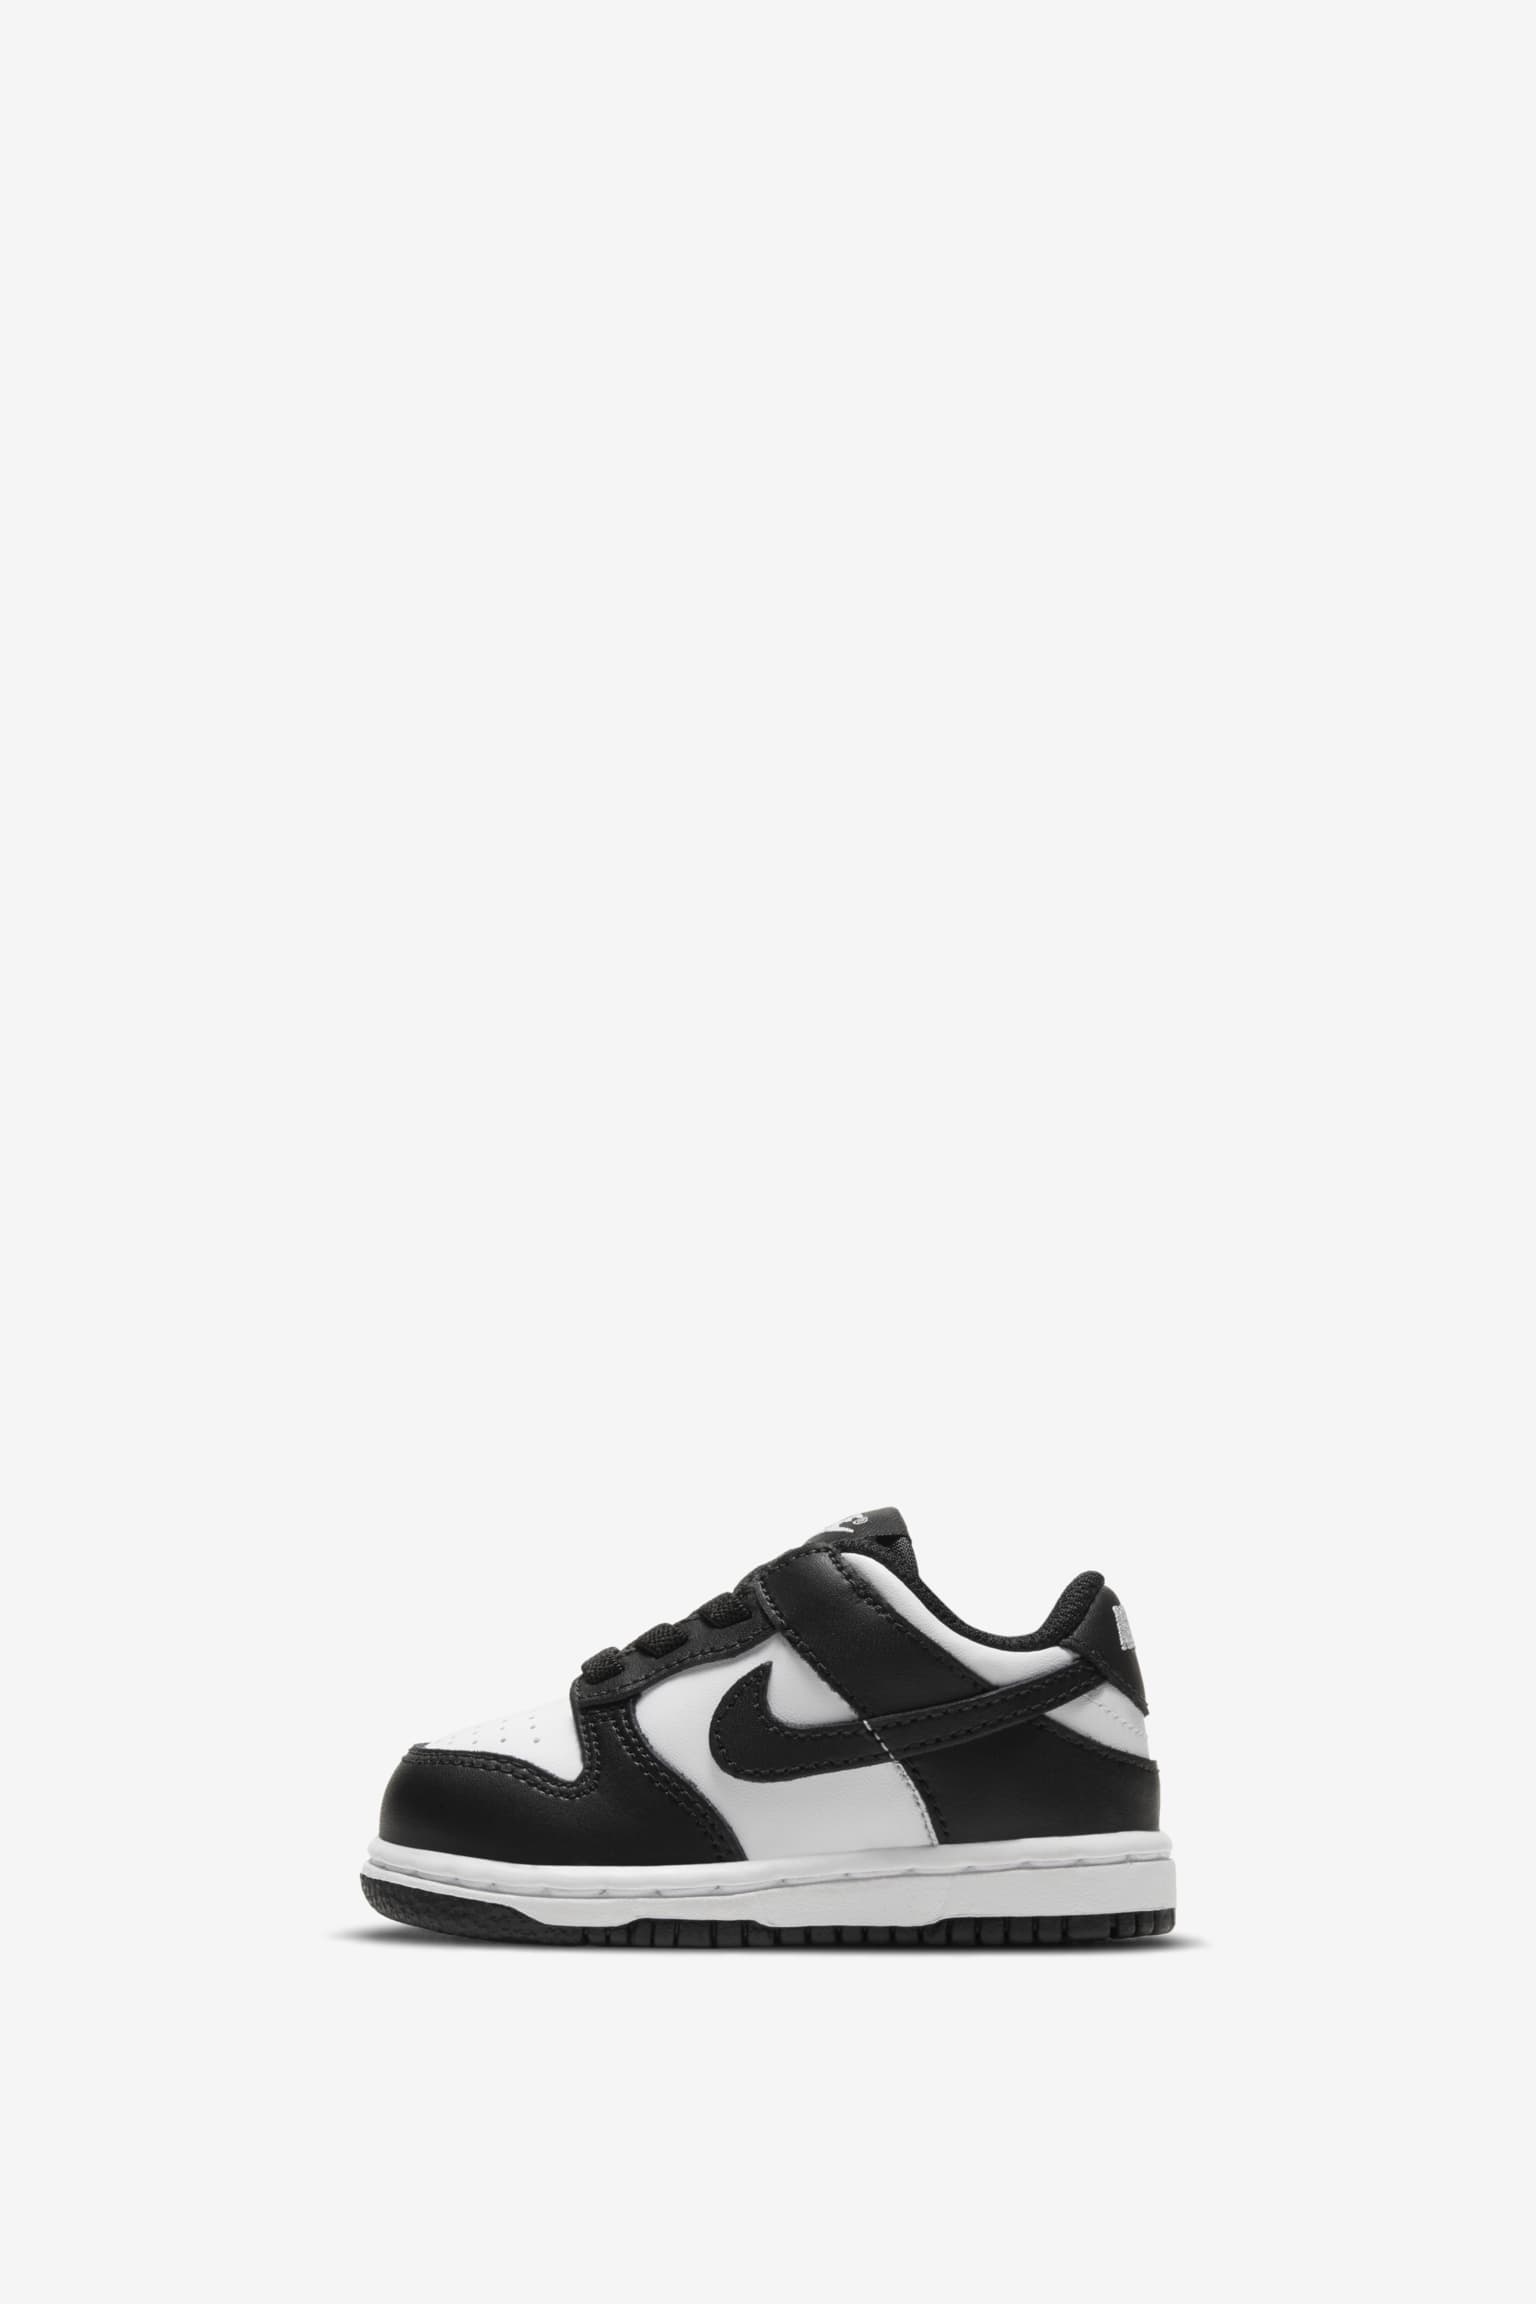 NIKE公式ダンク LOW 'Black' DD1391-100 / DUNK LOW. Nike SNKRS JP